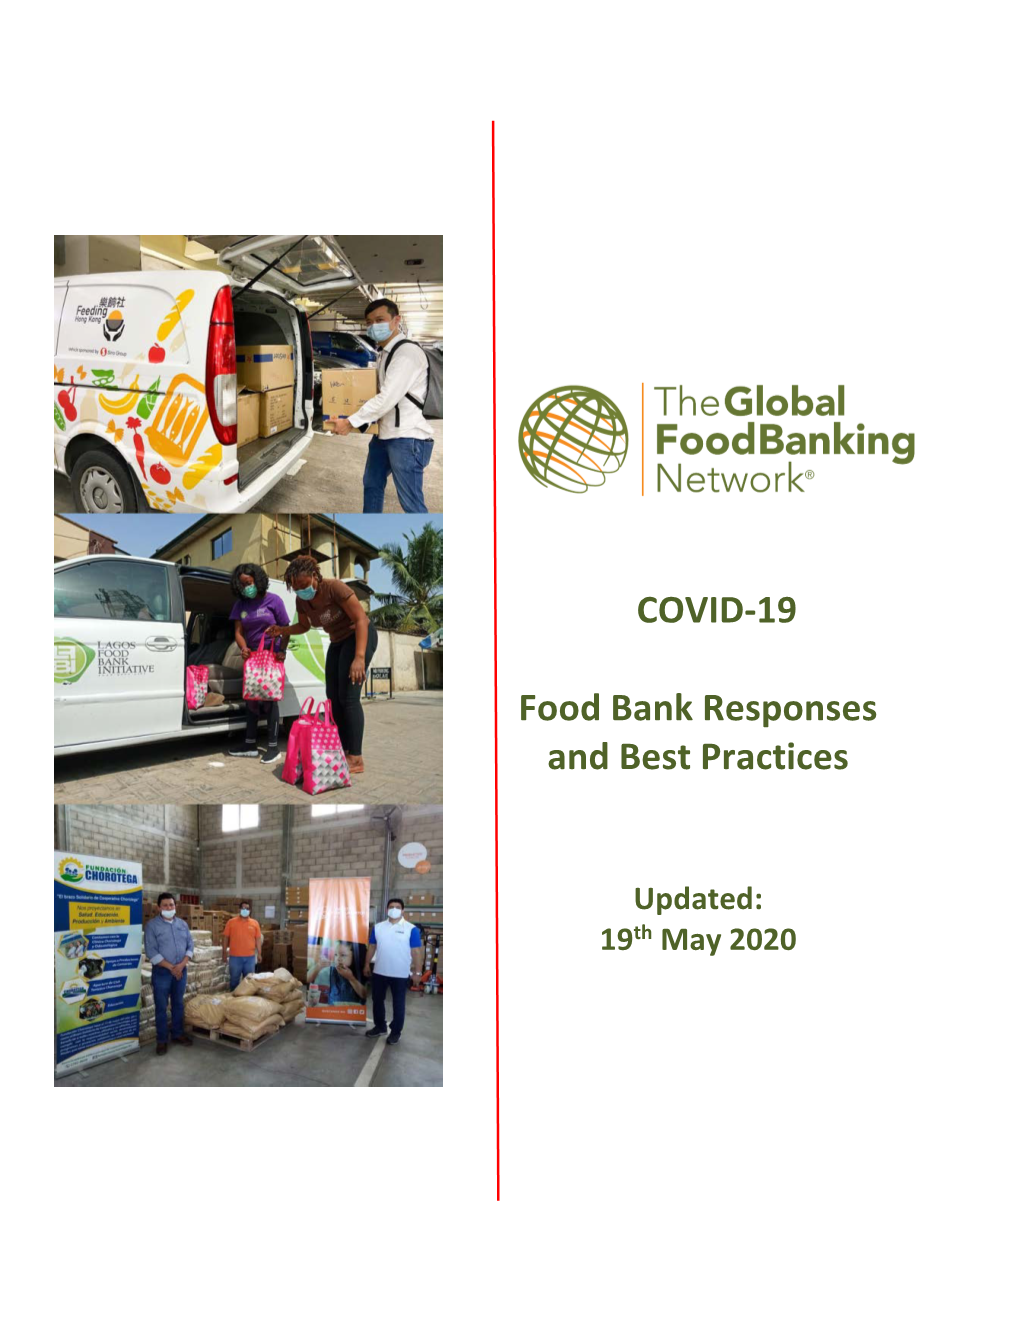 COVID-19 Food Bank Responses and Best Practices